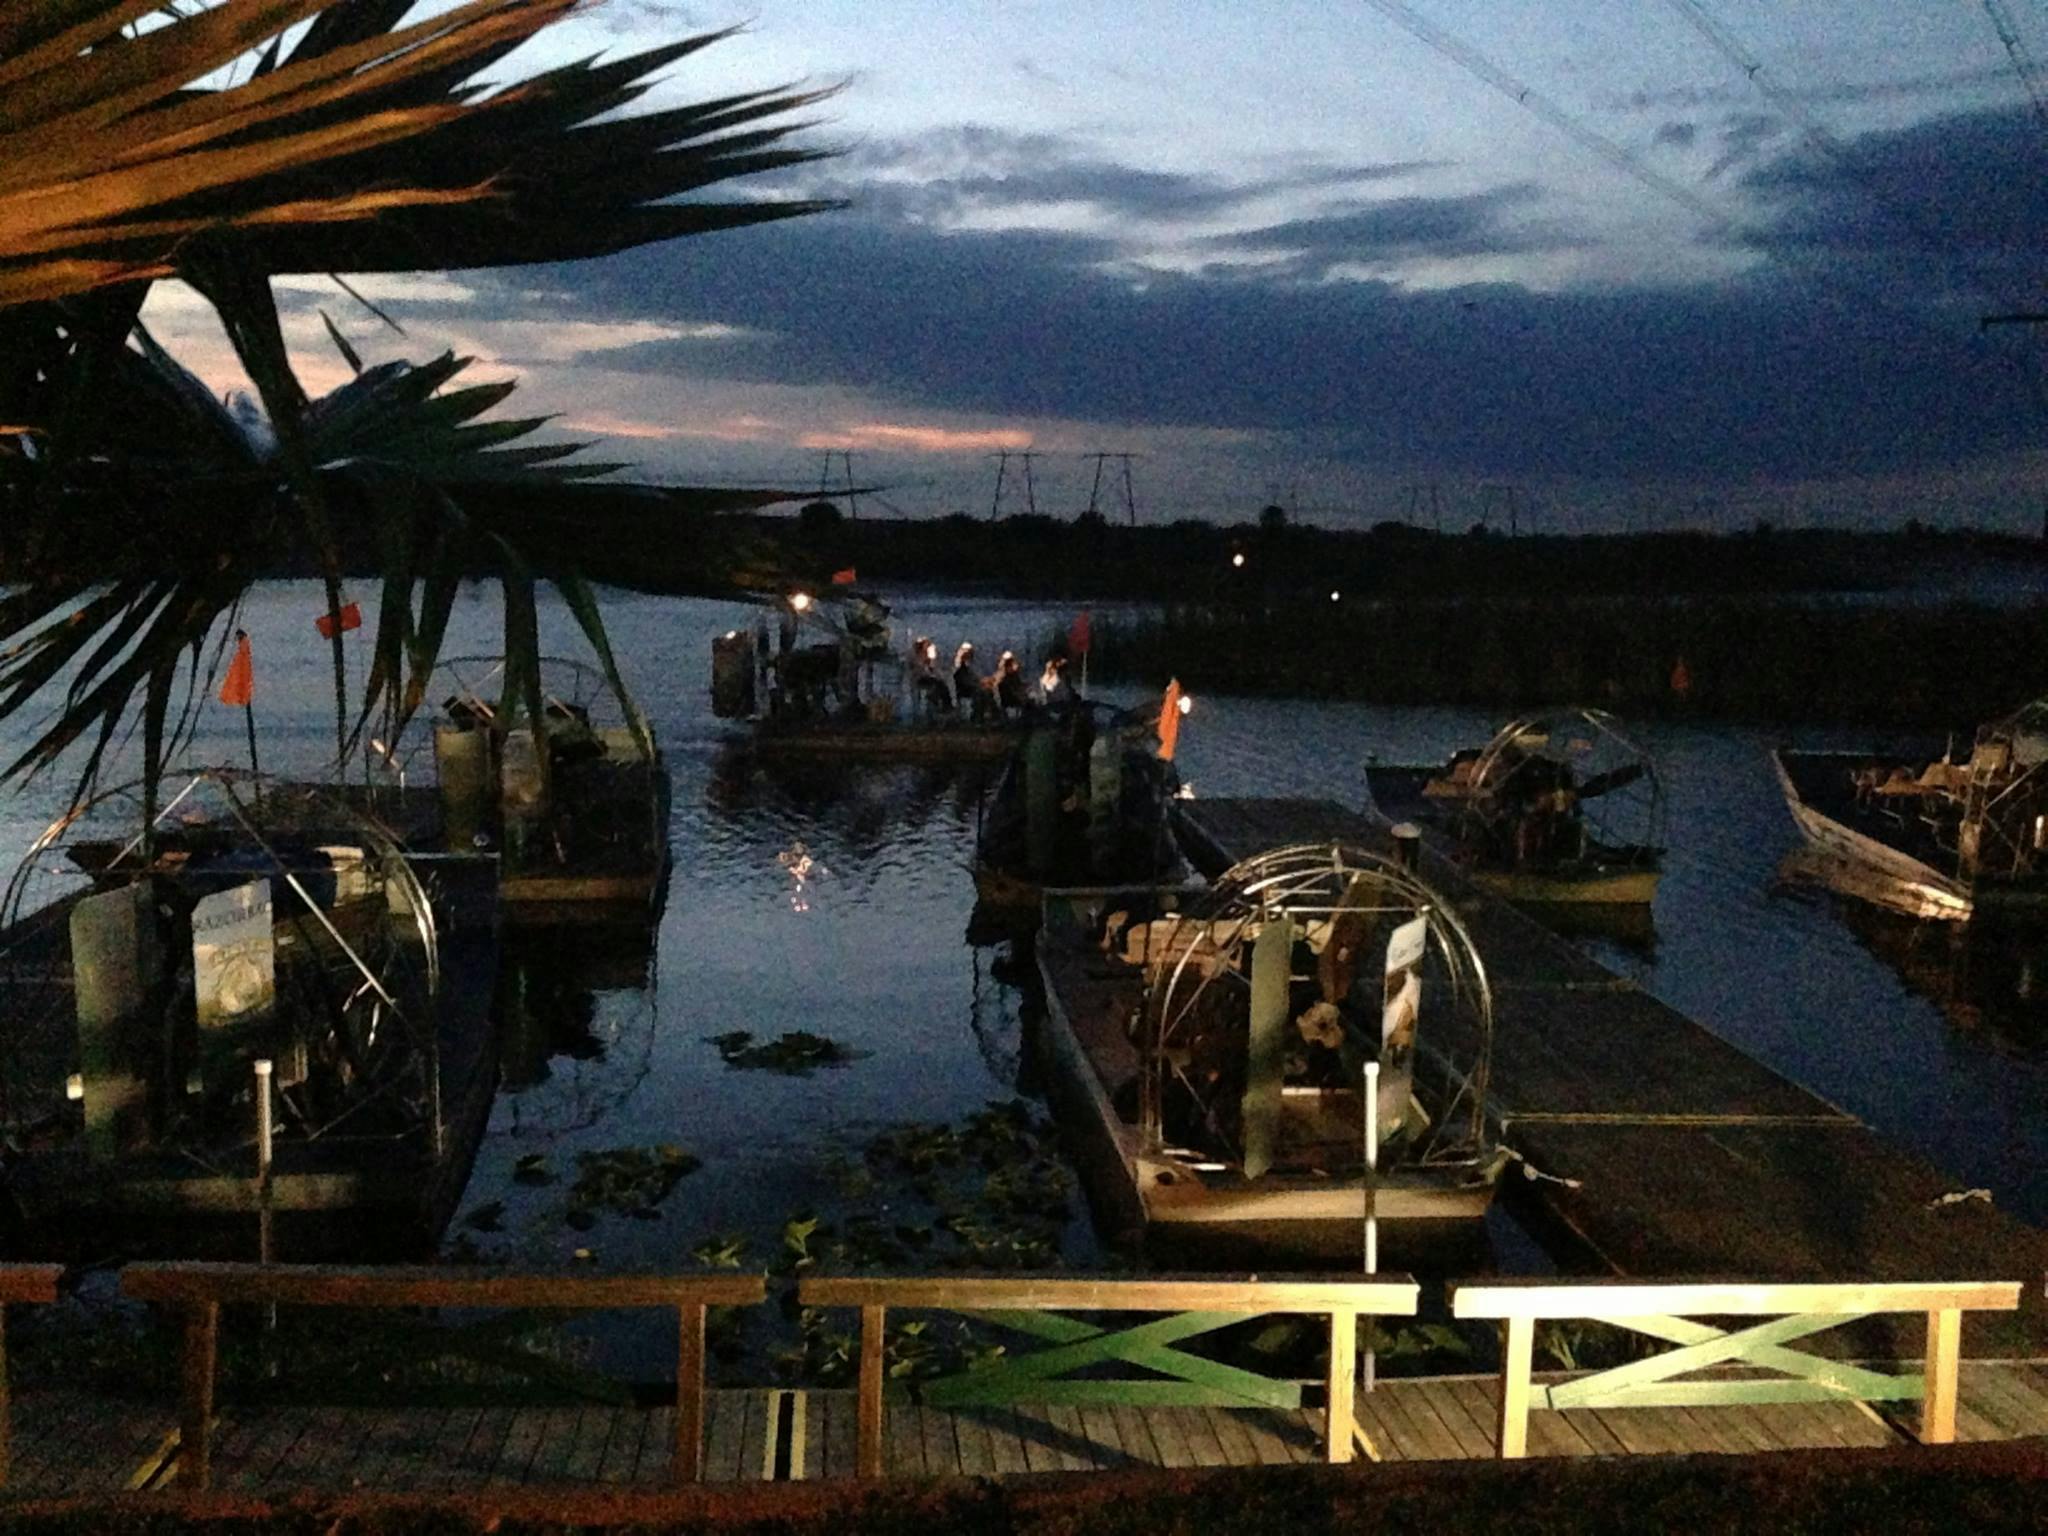 Gator Night 60 minute nighttime airboat tour at Sawgrass Recreation Park Musement